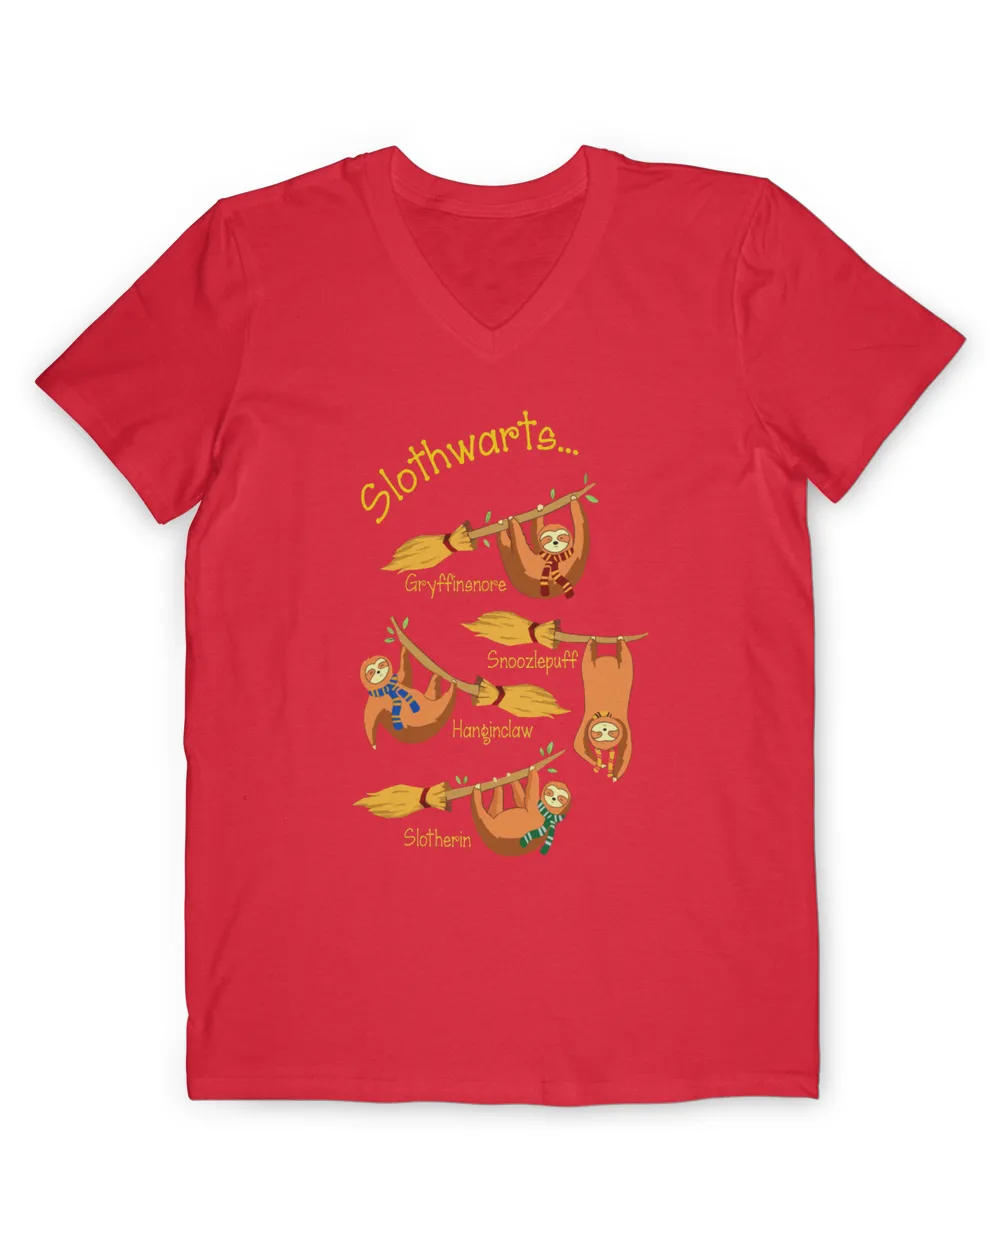 Funny Slothwarts Gryffinsnore Snoozlepuff Hangiclaw Slotherin